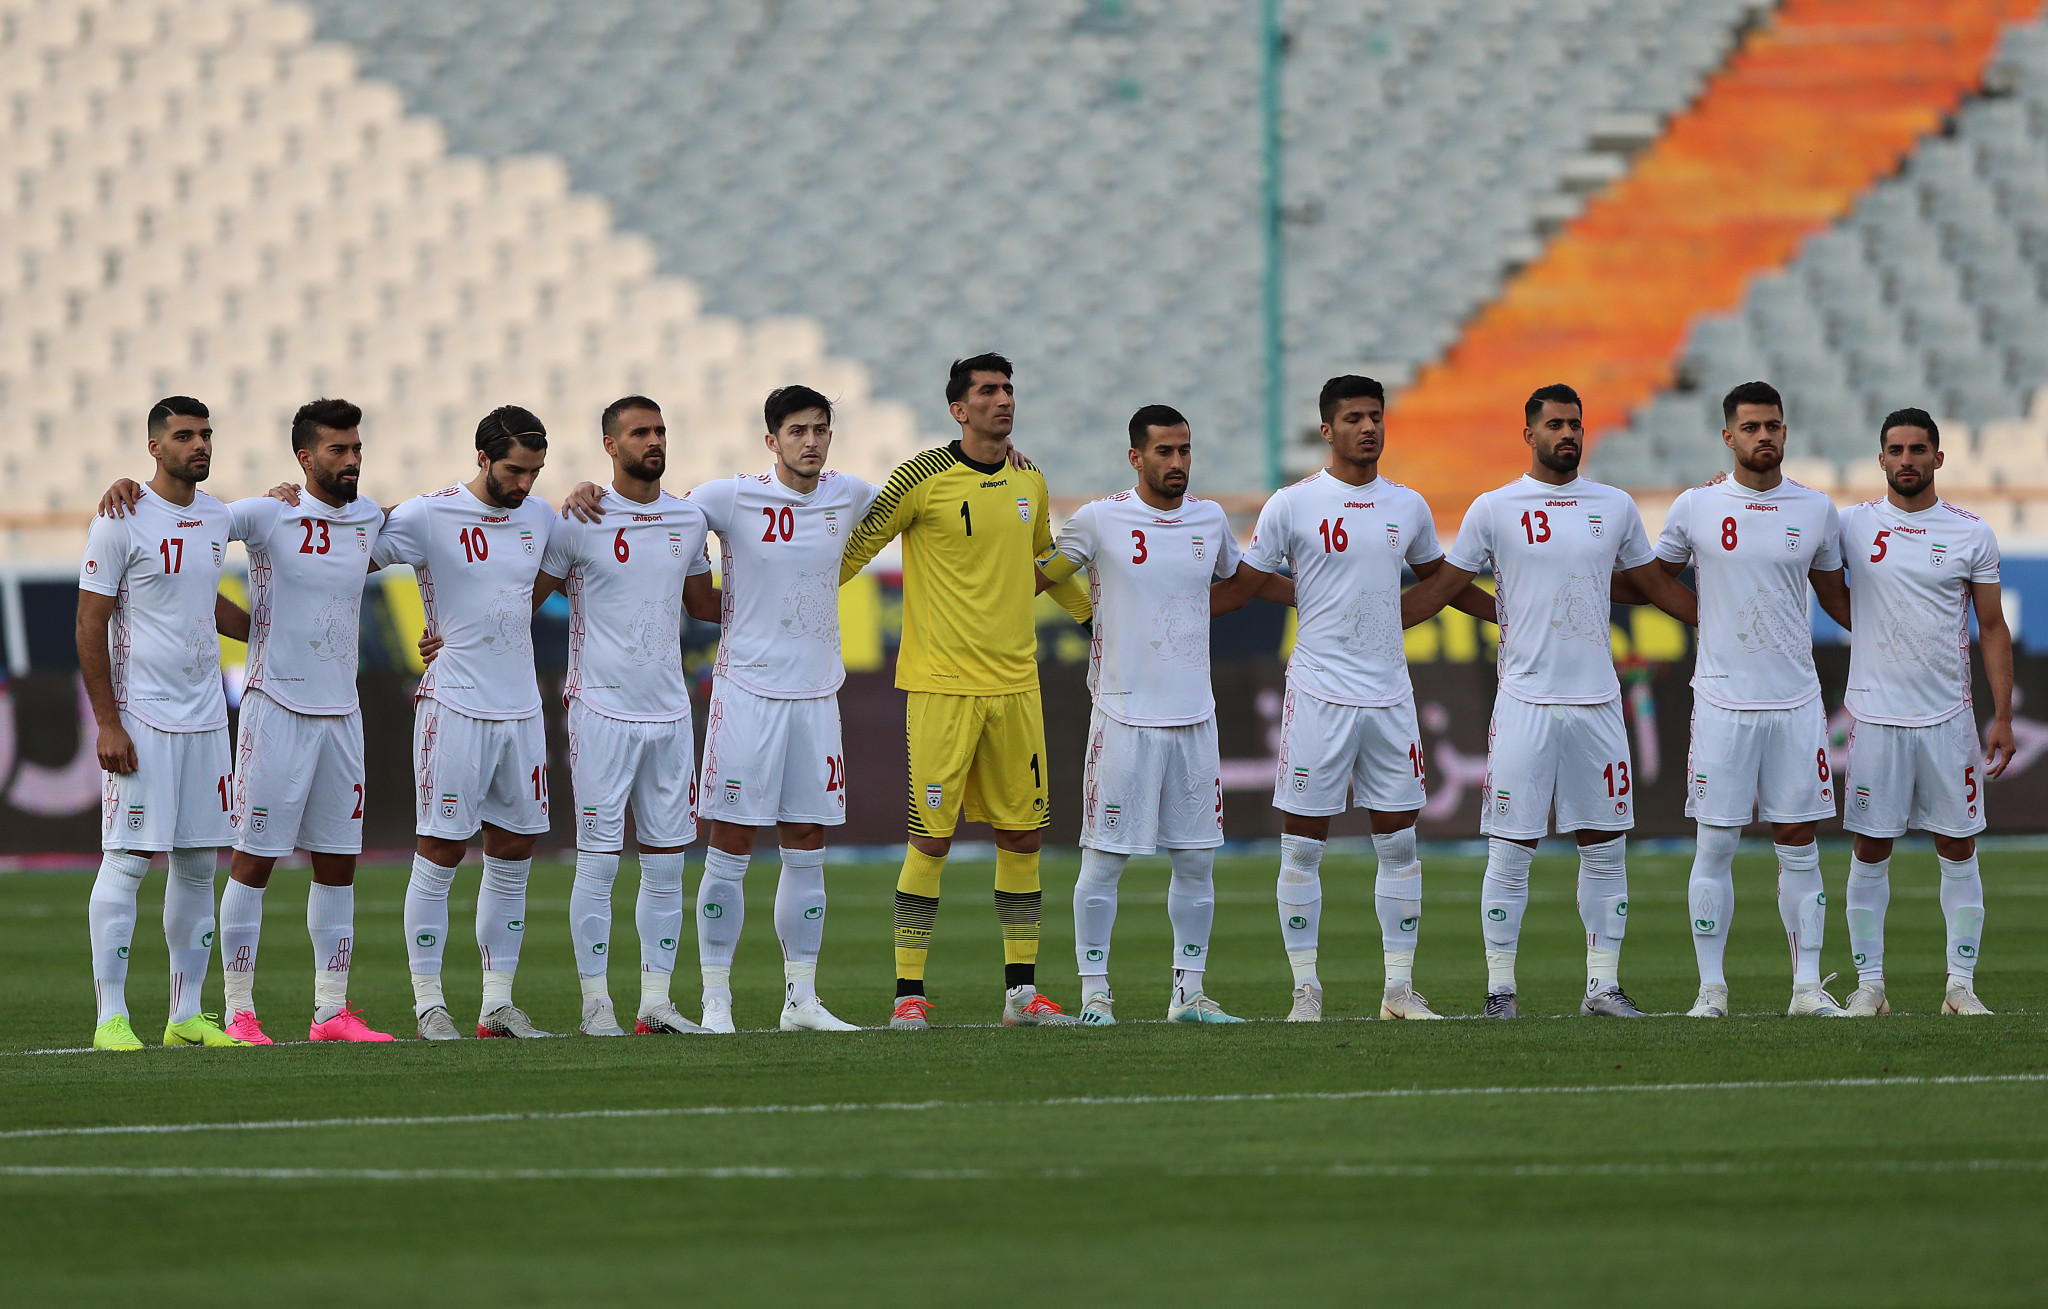 "Minor changes" needed for Iranian statutes to be approved by FIFA